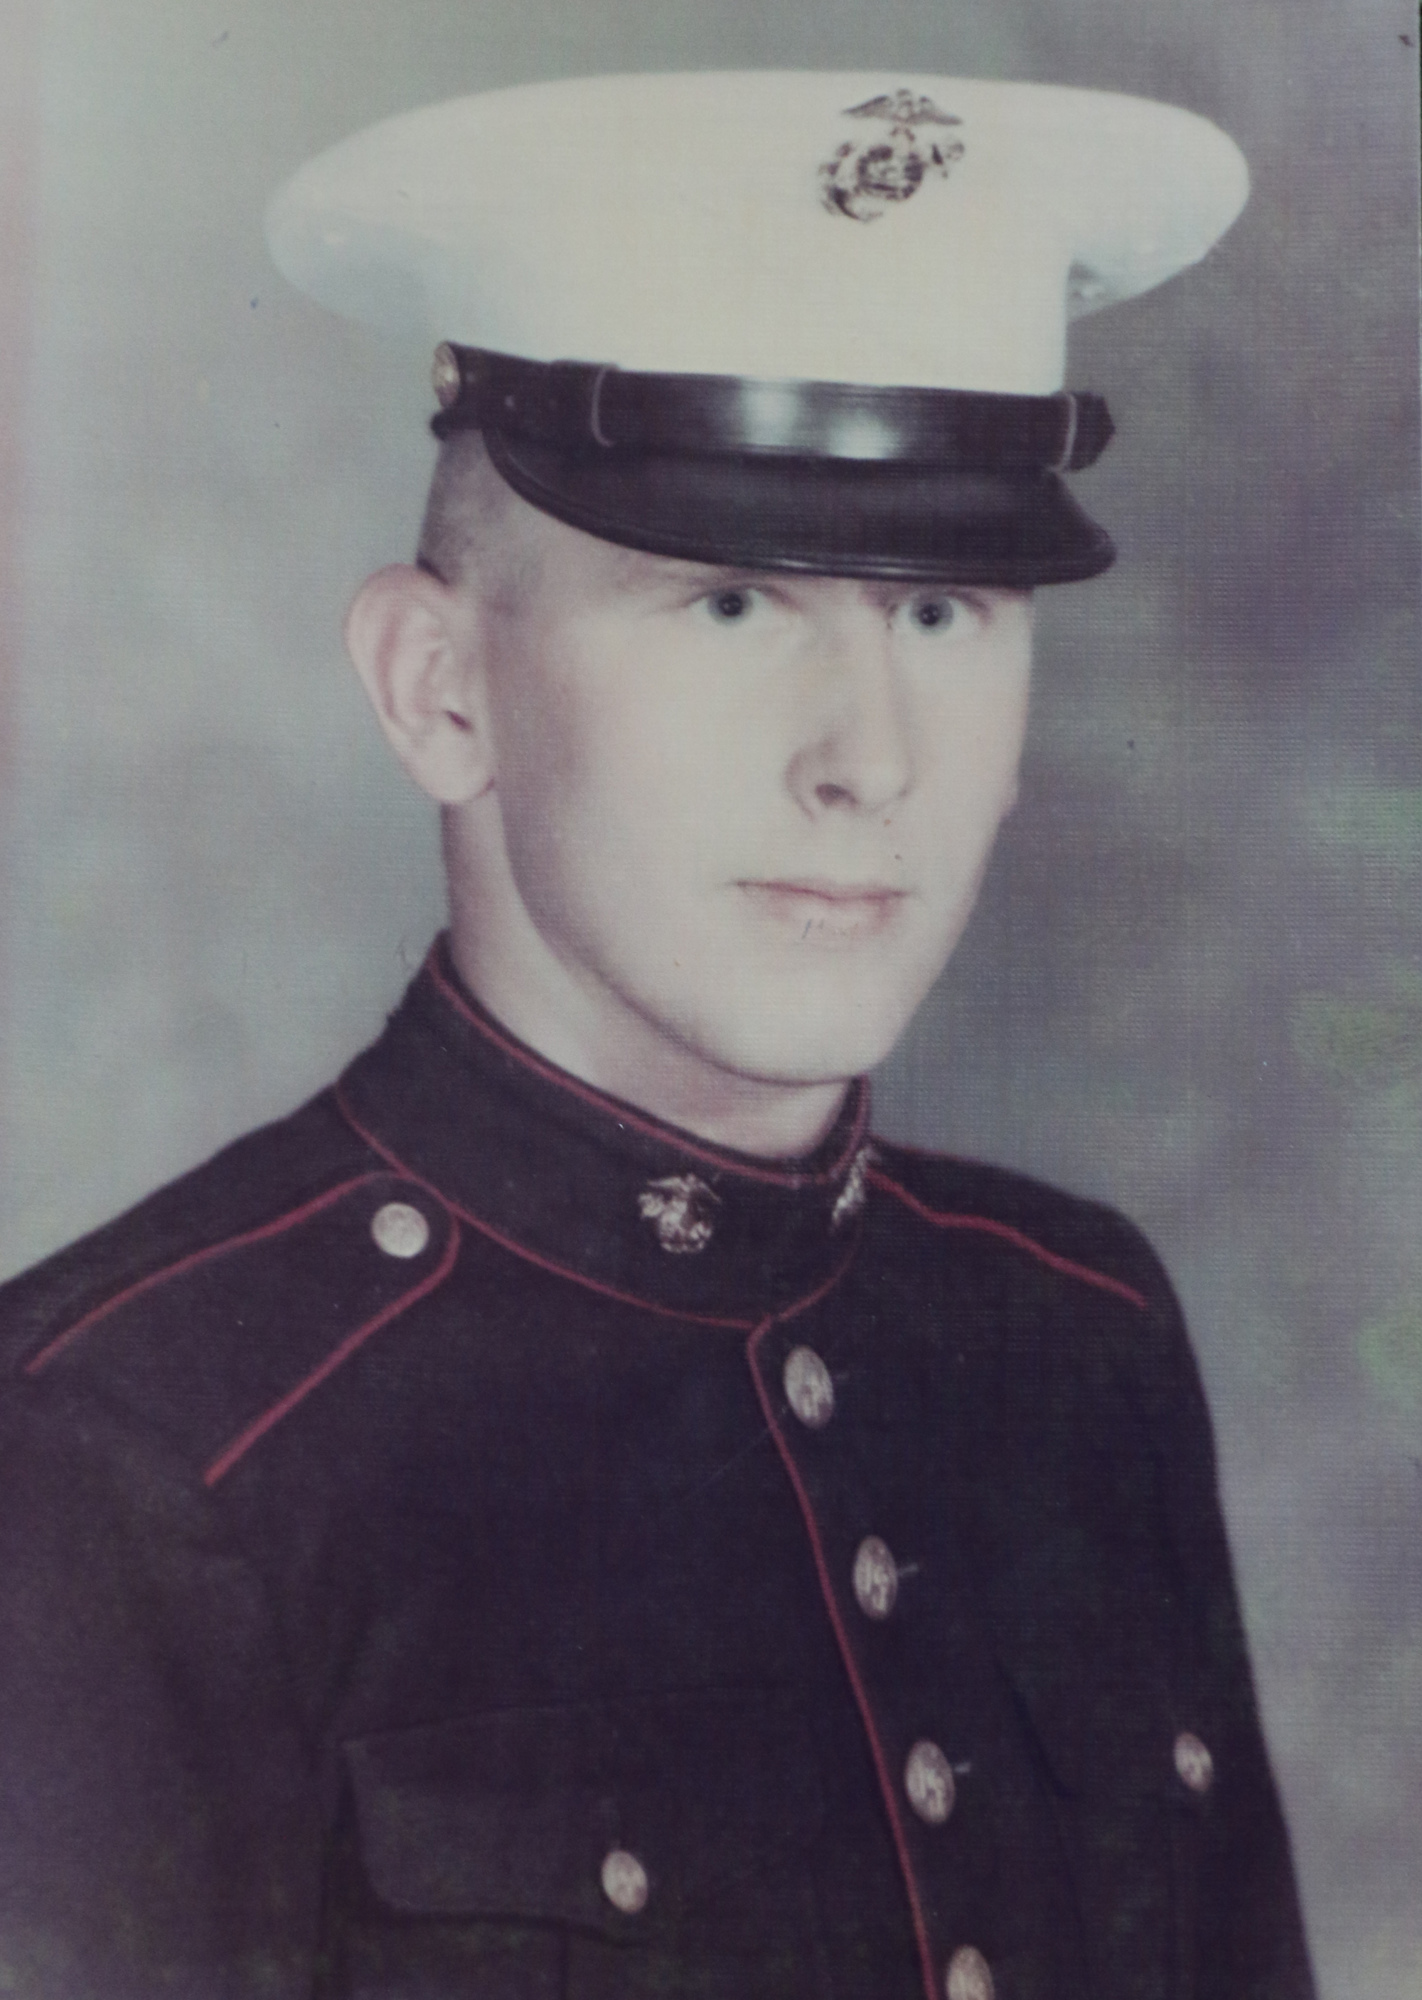 Fresh out of high school, John Reeves knew he wanted to enlist in the Marines. Courtesy photo